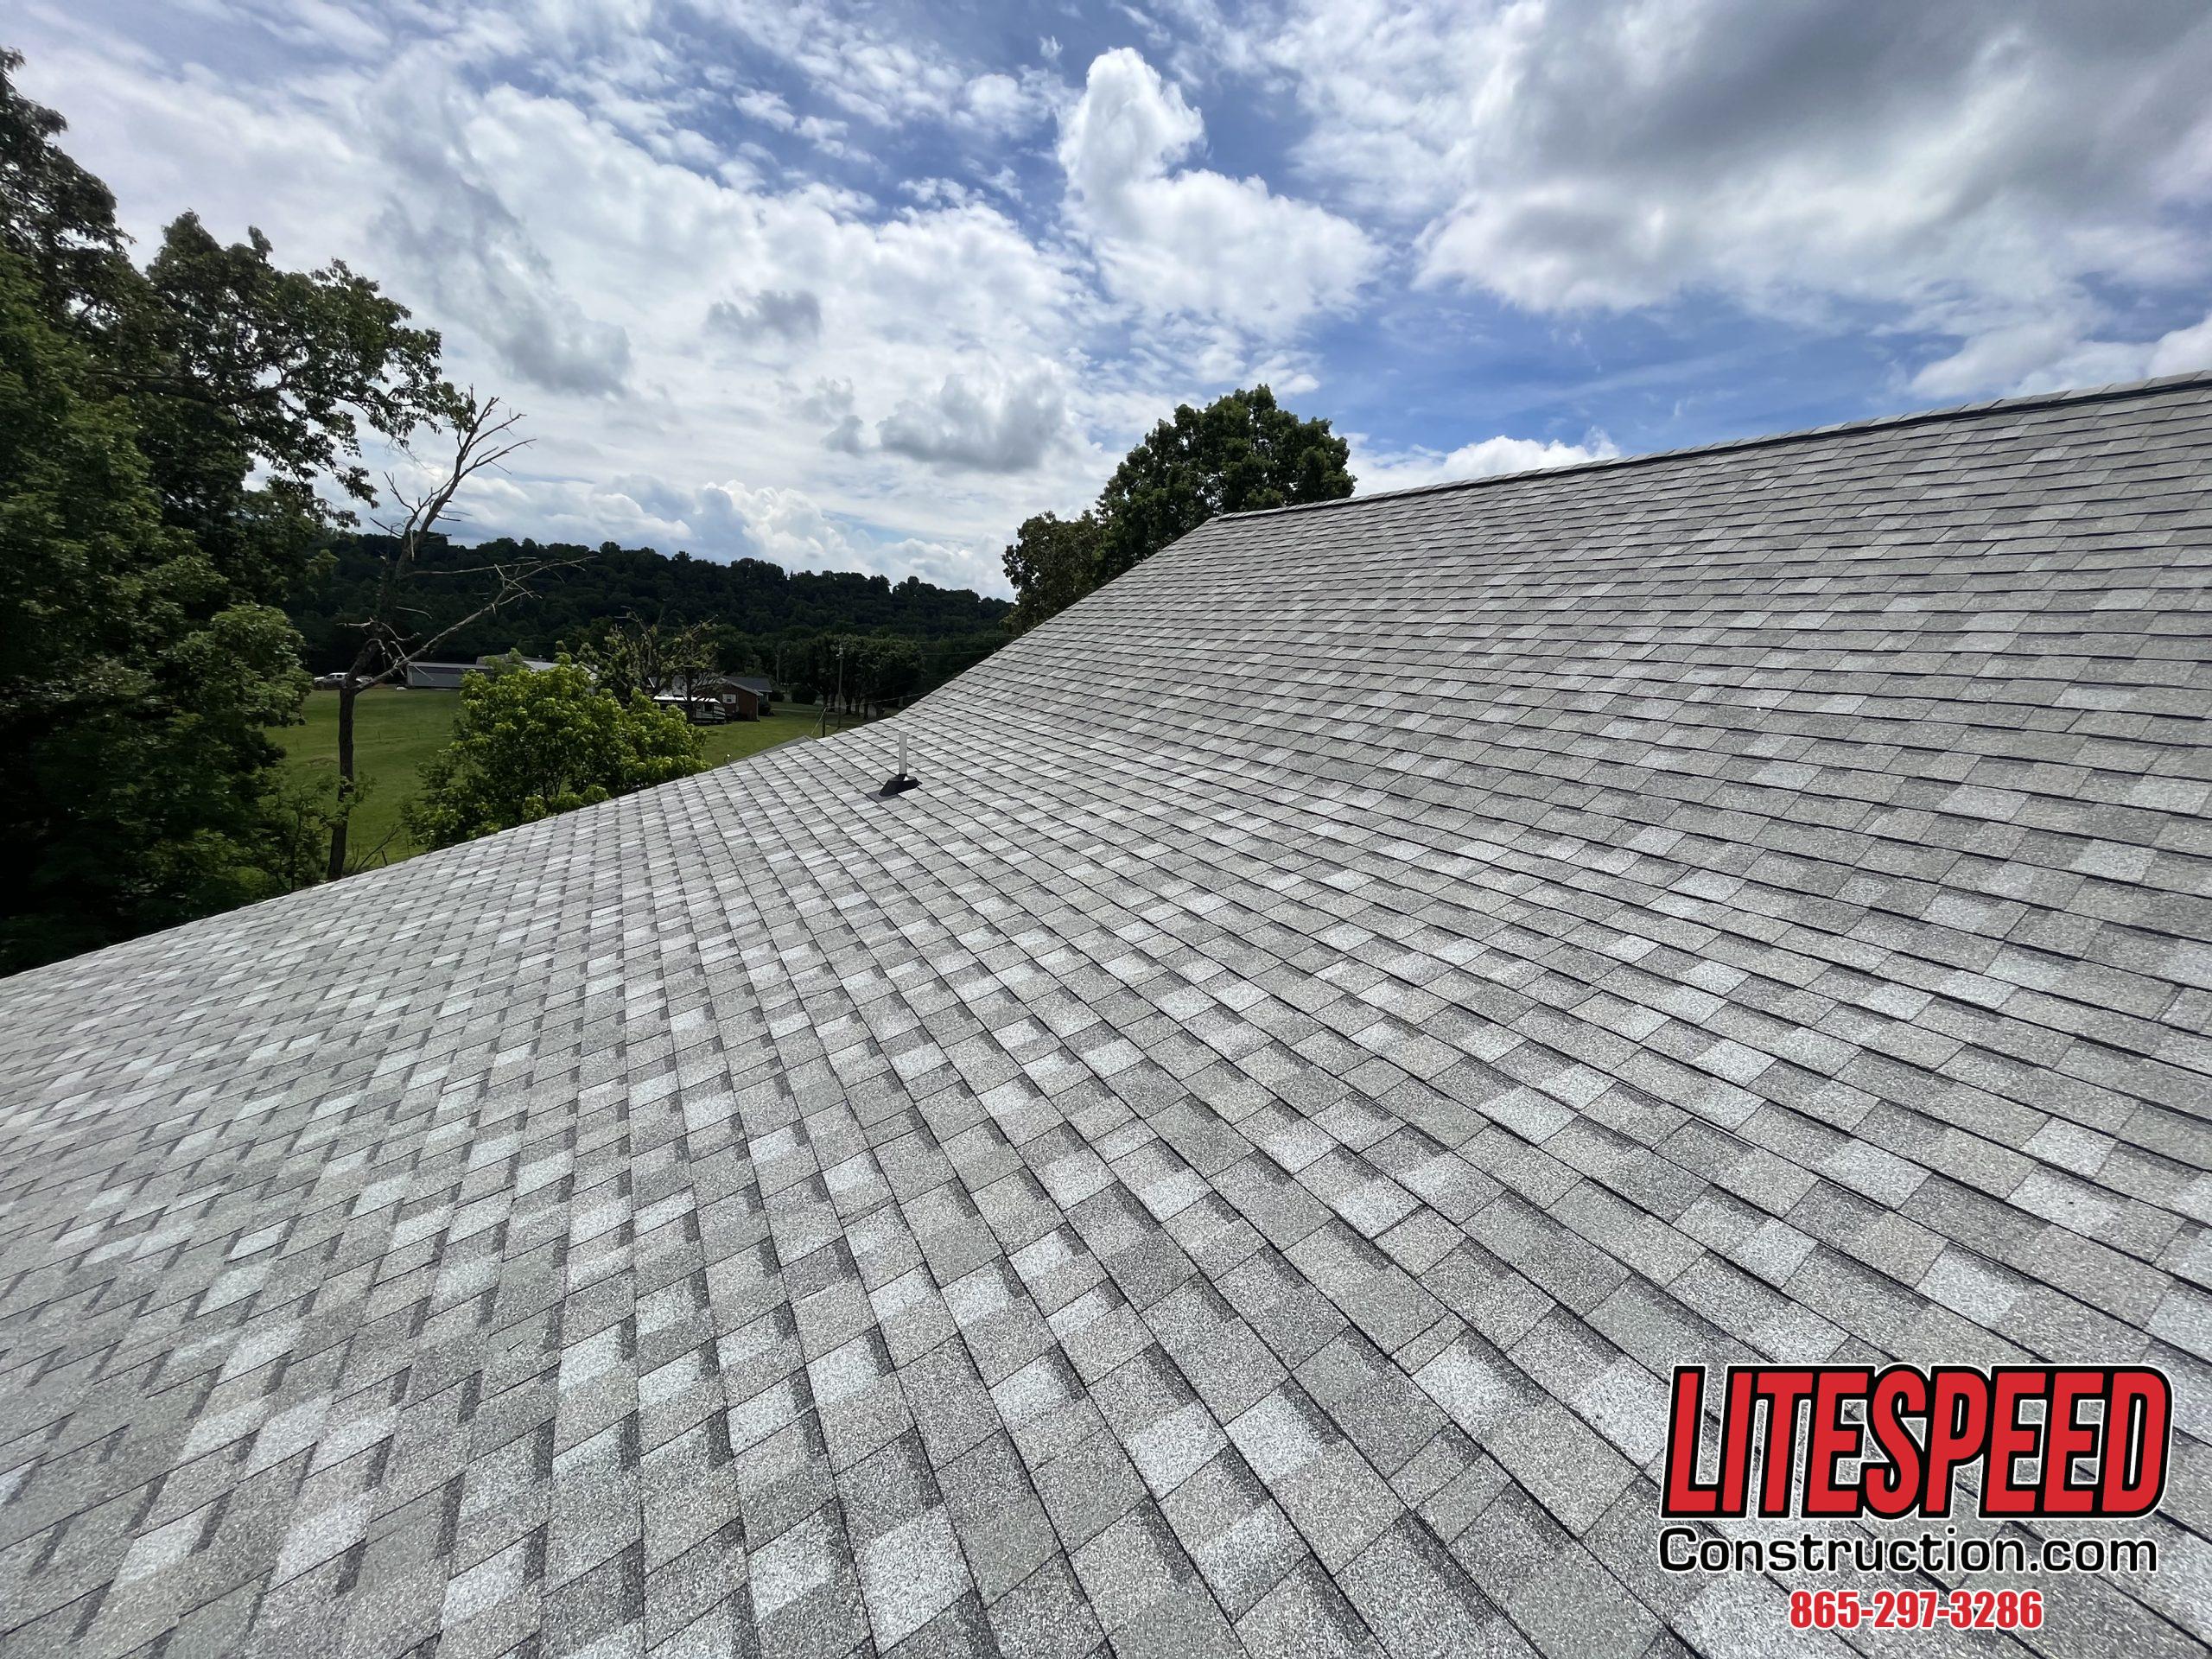 This is a picture of a light gray shingle roof